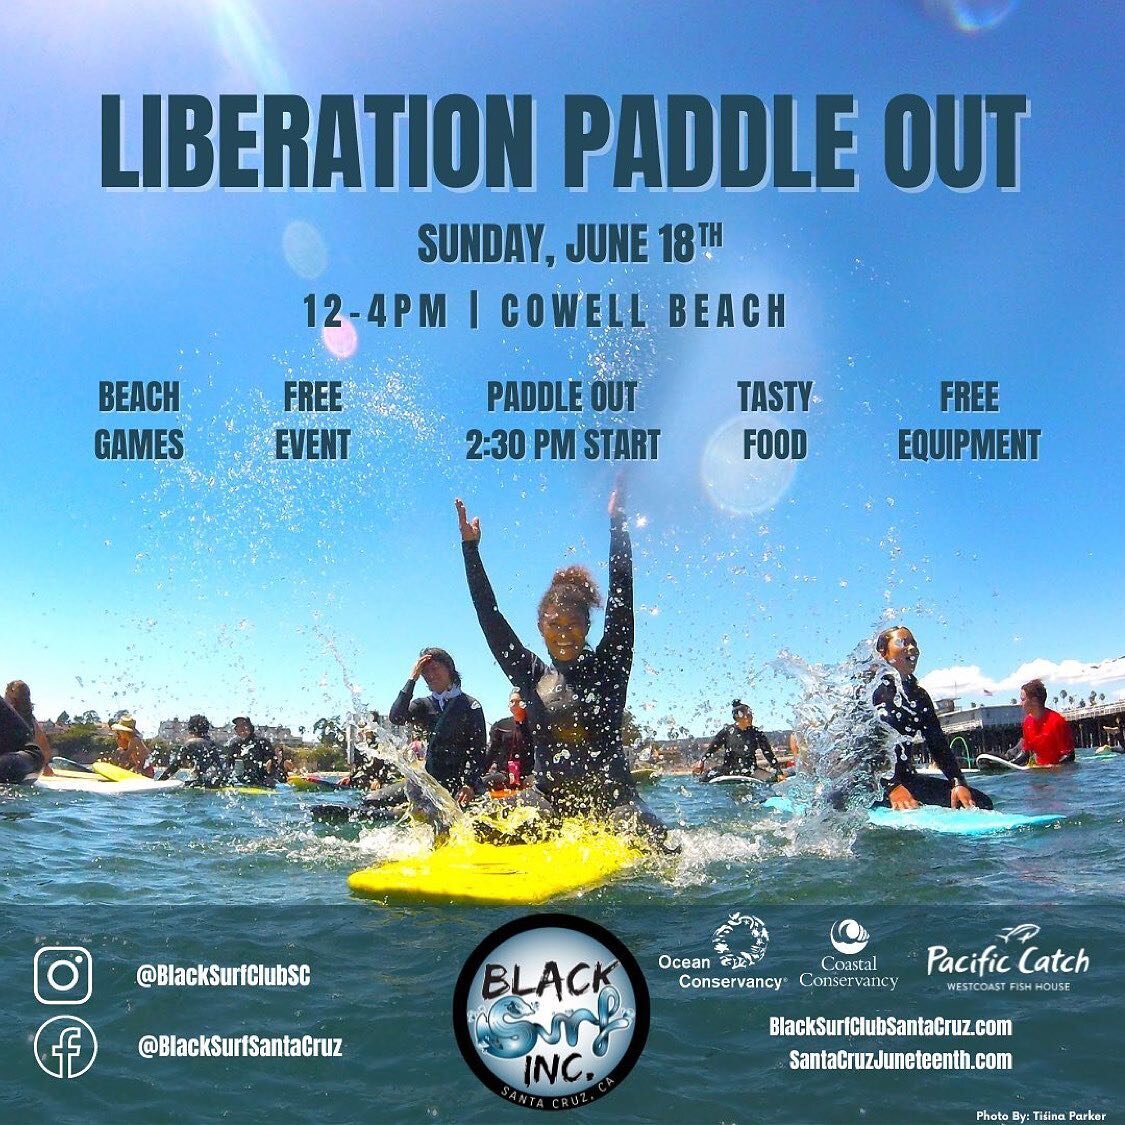 BHMI is a proud founding sponsor of the @blacksurfsantacruz Liberation Paddleout! Bella is also one of our very own founding advisors and we are honored to work with her and support her mission with Black Surf. She&rsquo;s making 🌊 in Santa Cruz cou